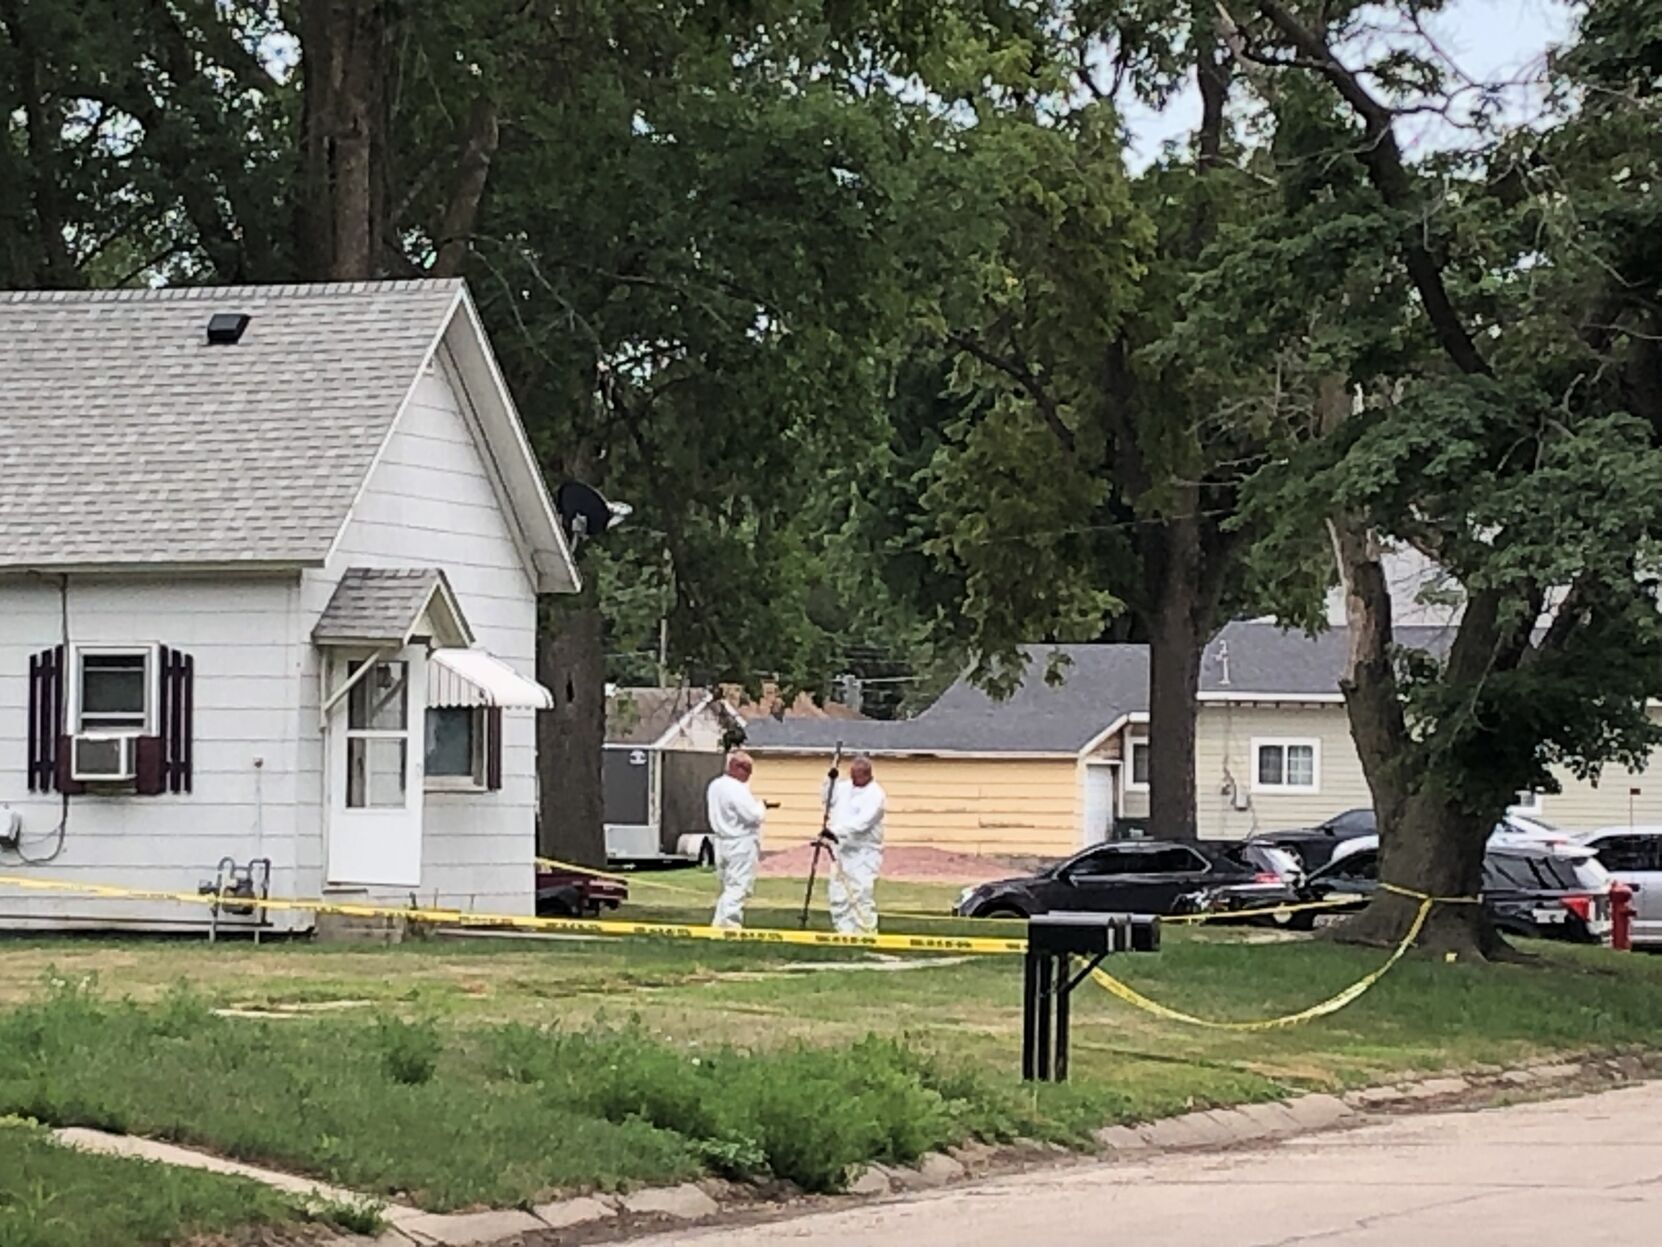 Neighbor charged with 10 felonies in connection to four murders in small Nebraska town